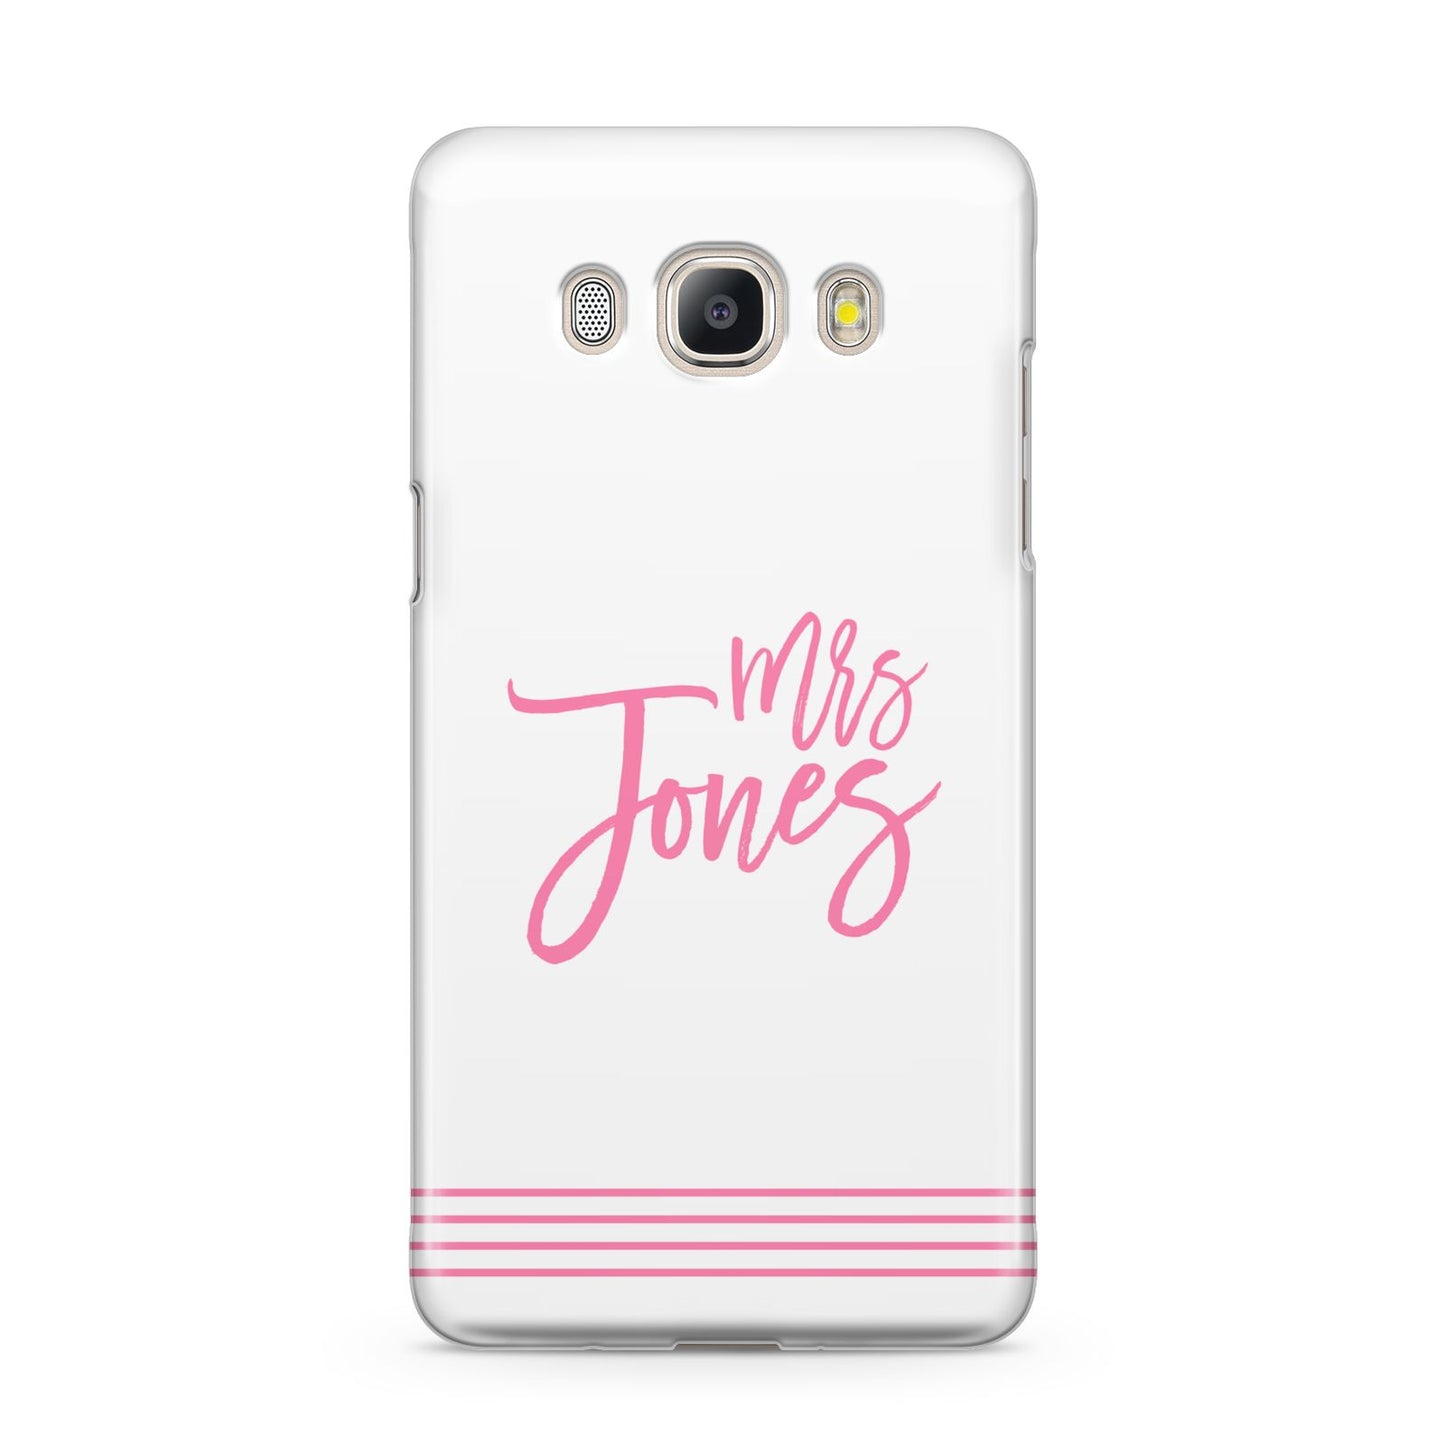 Personalised Hers Samsung Galaxy J5 2016 Case